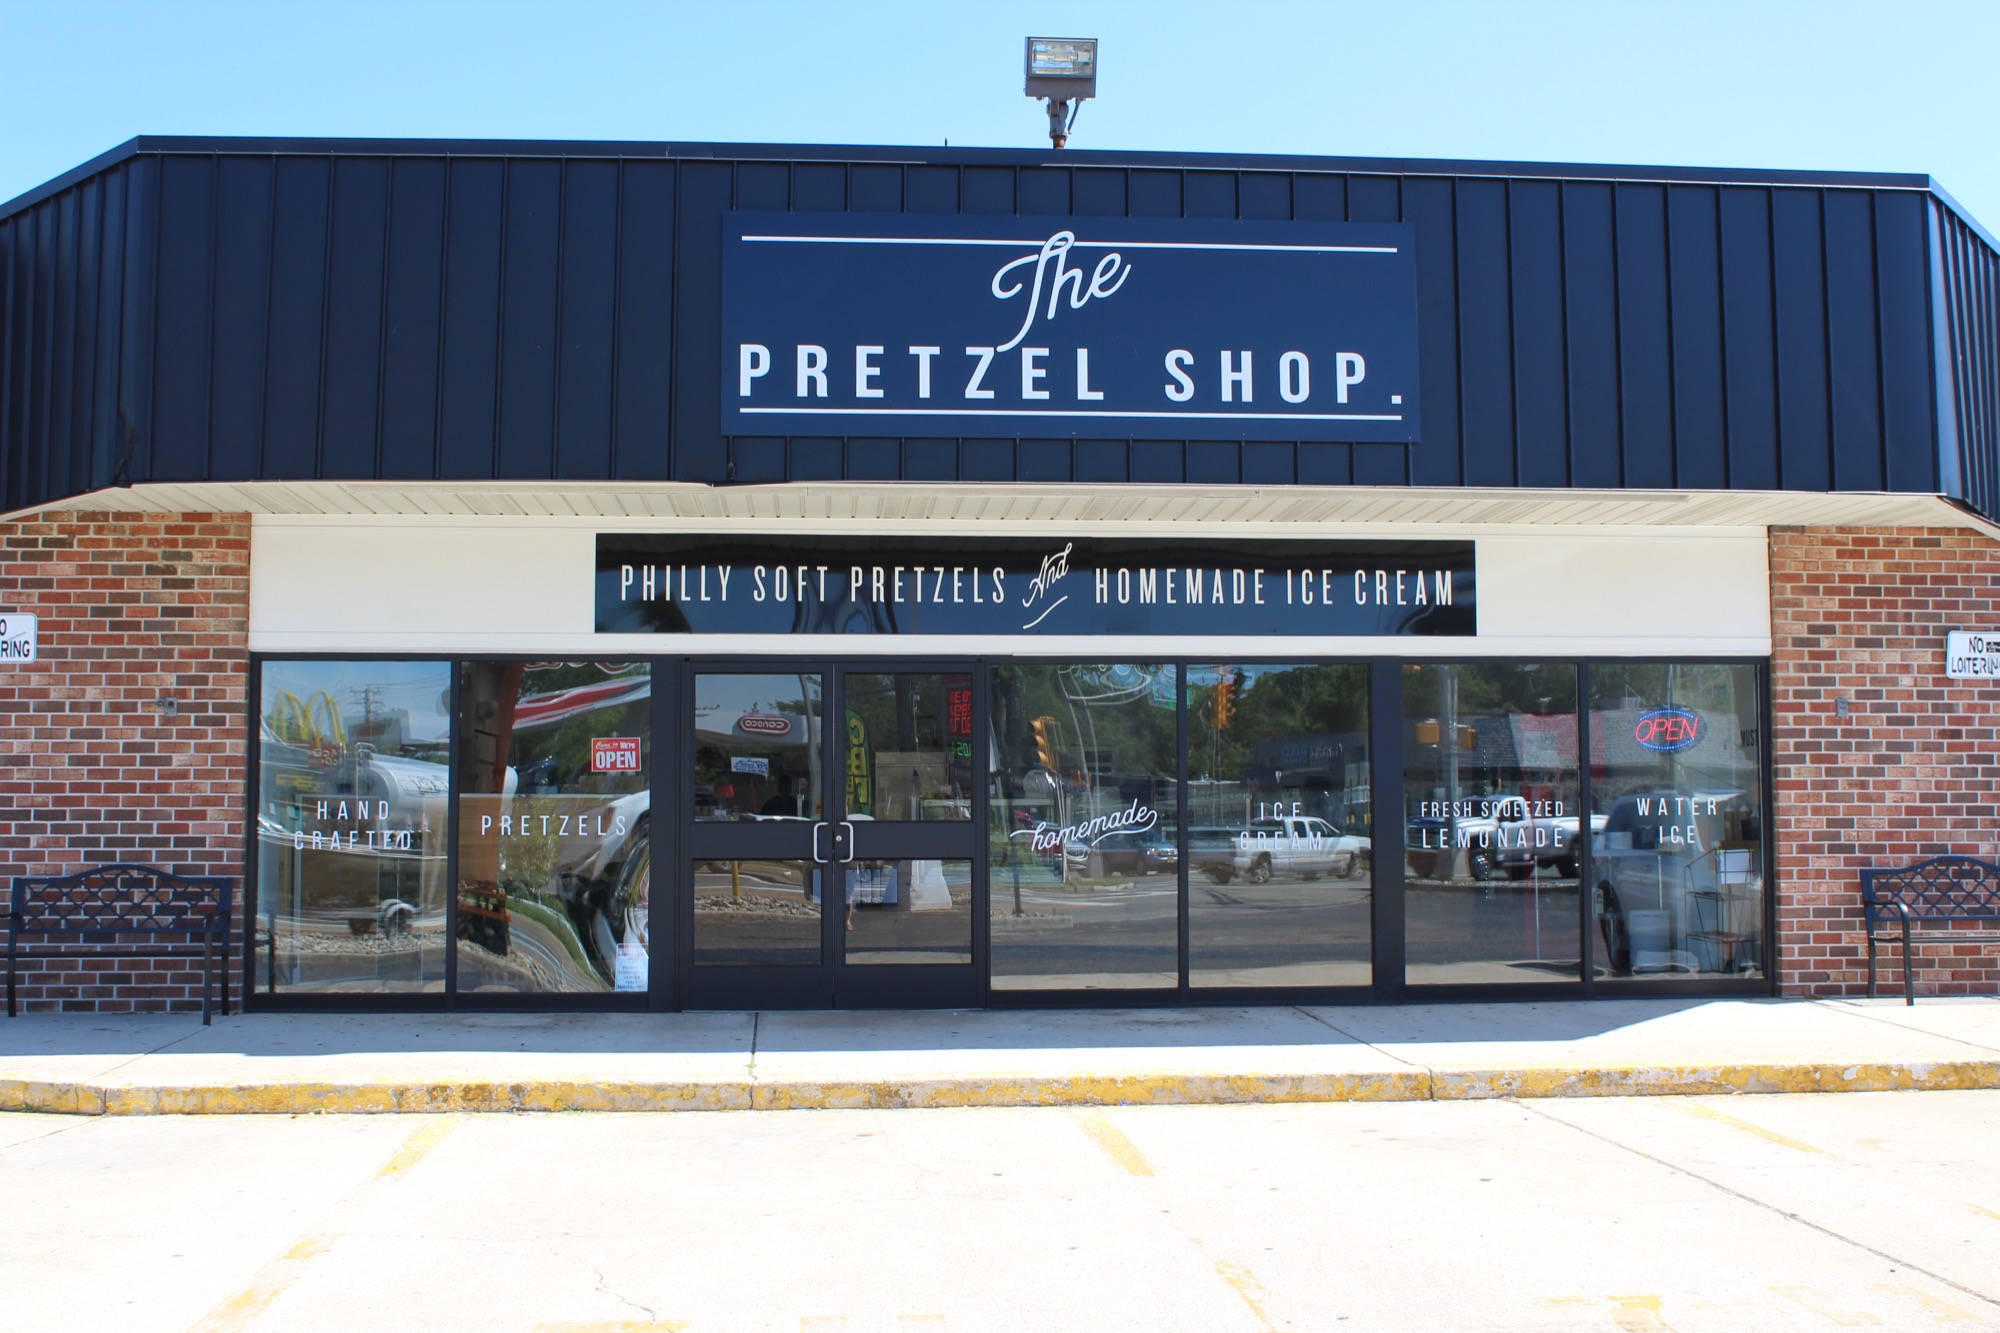 The Pretzel Shop is located at 301 Rt. 9 N